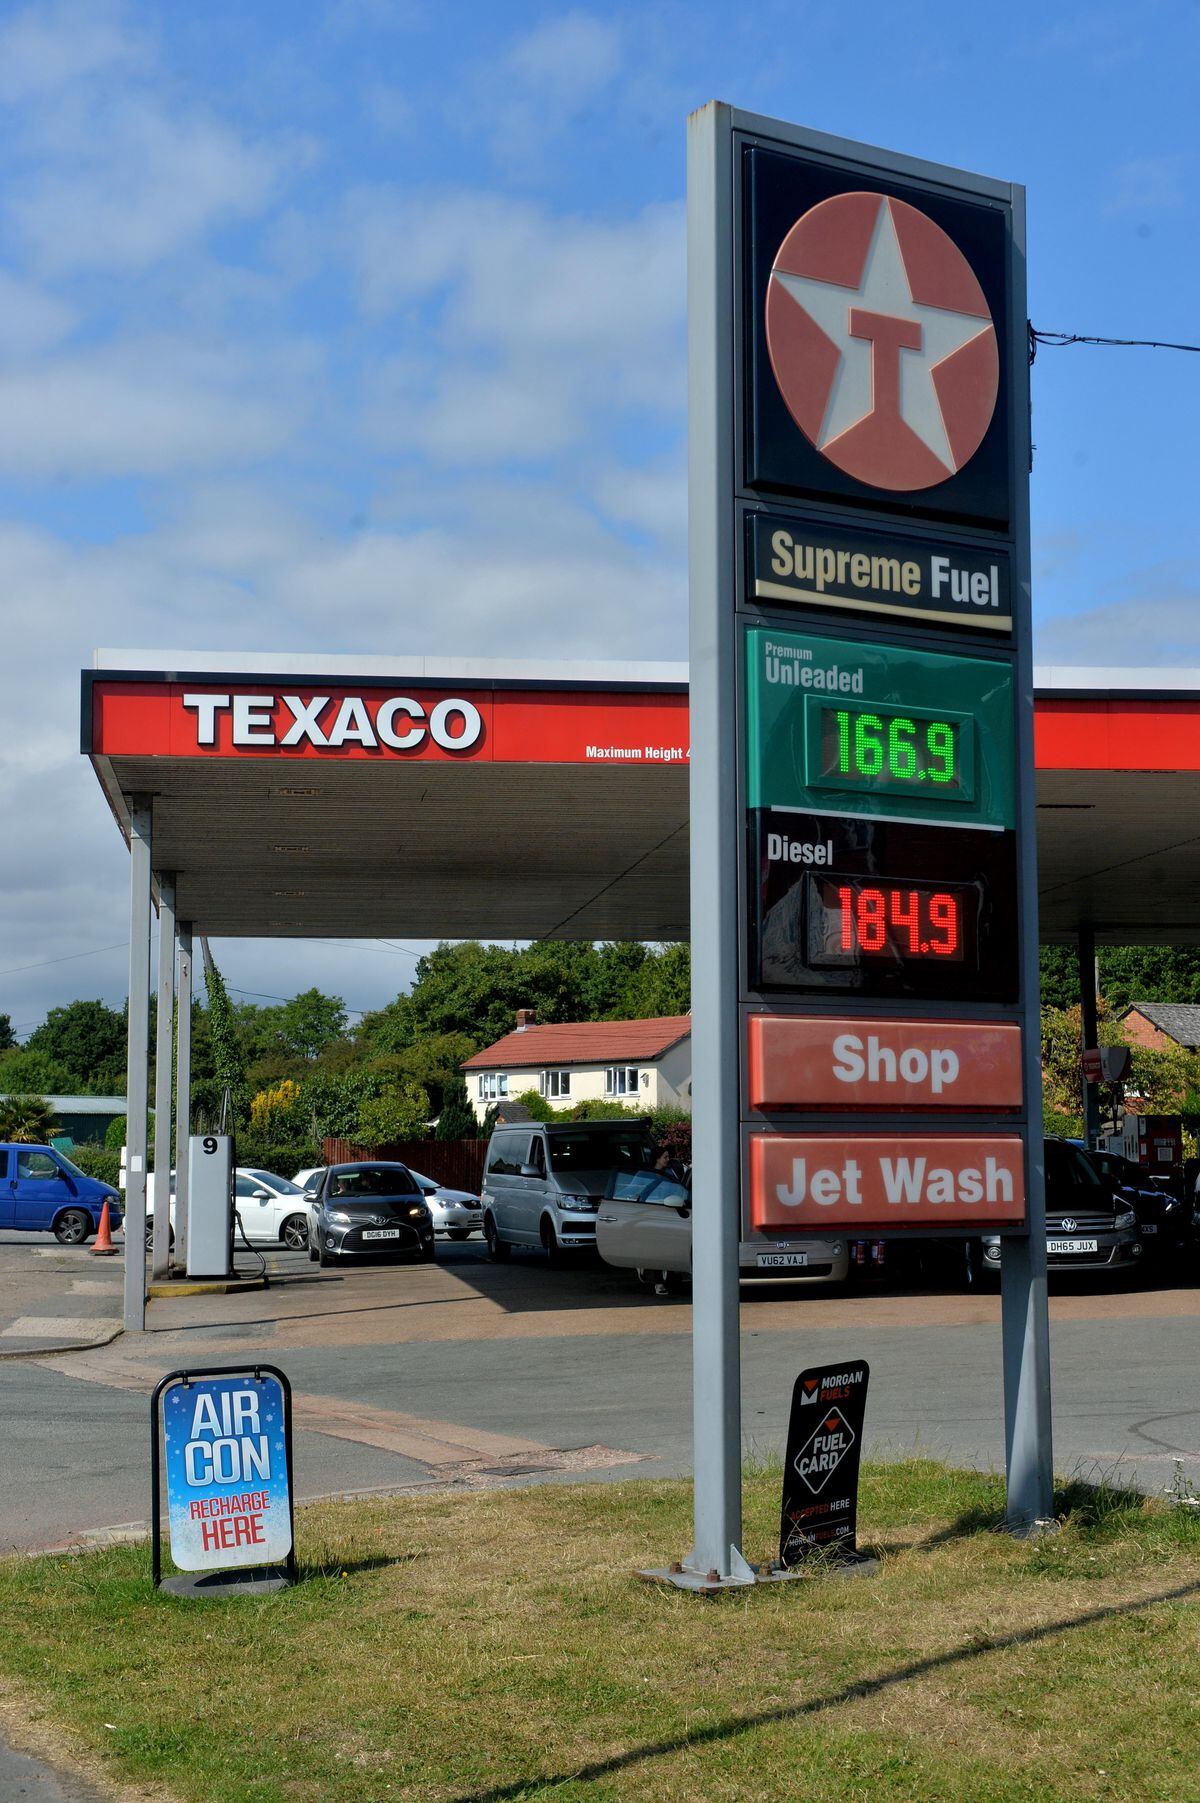 The forecourt is charging 23p under the national average for unleaded